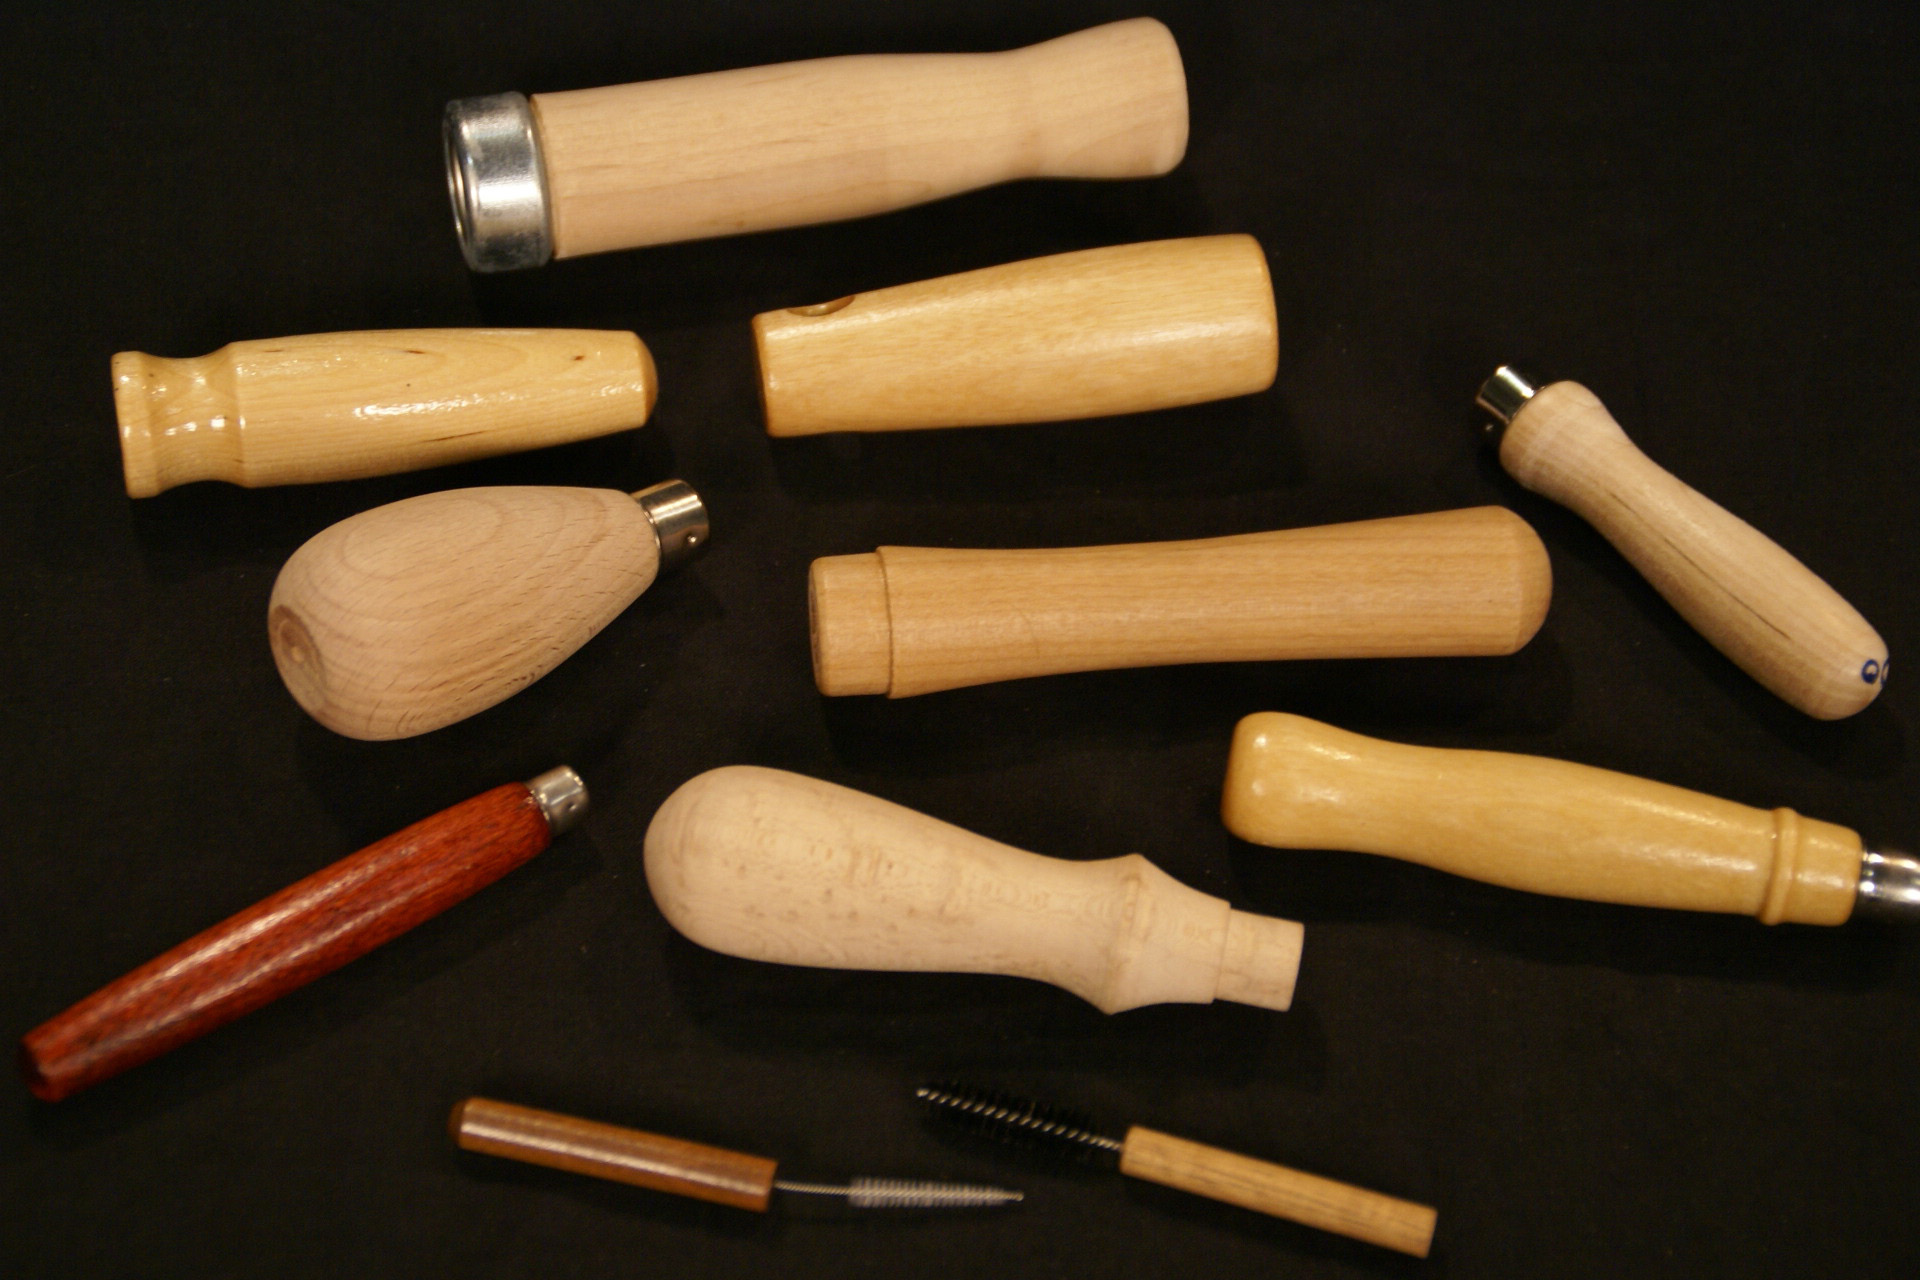 Group of Small Tool Handles